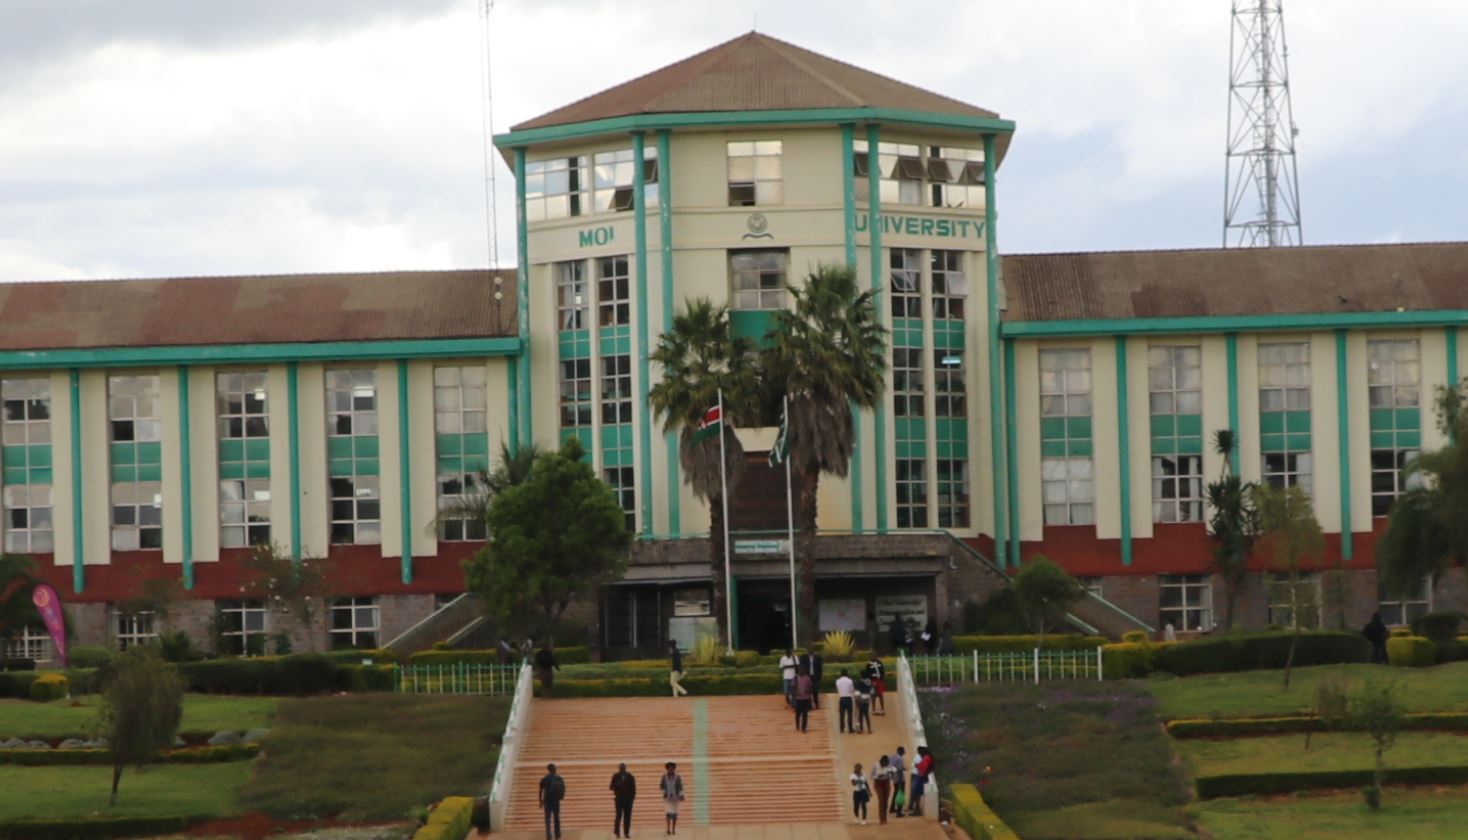 Moi university financial crisis, declared insolvent